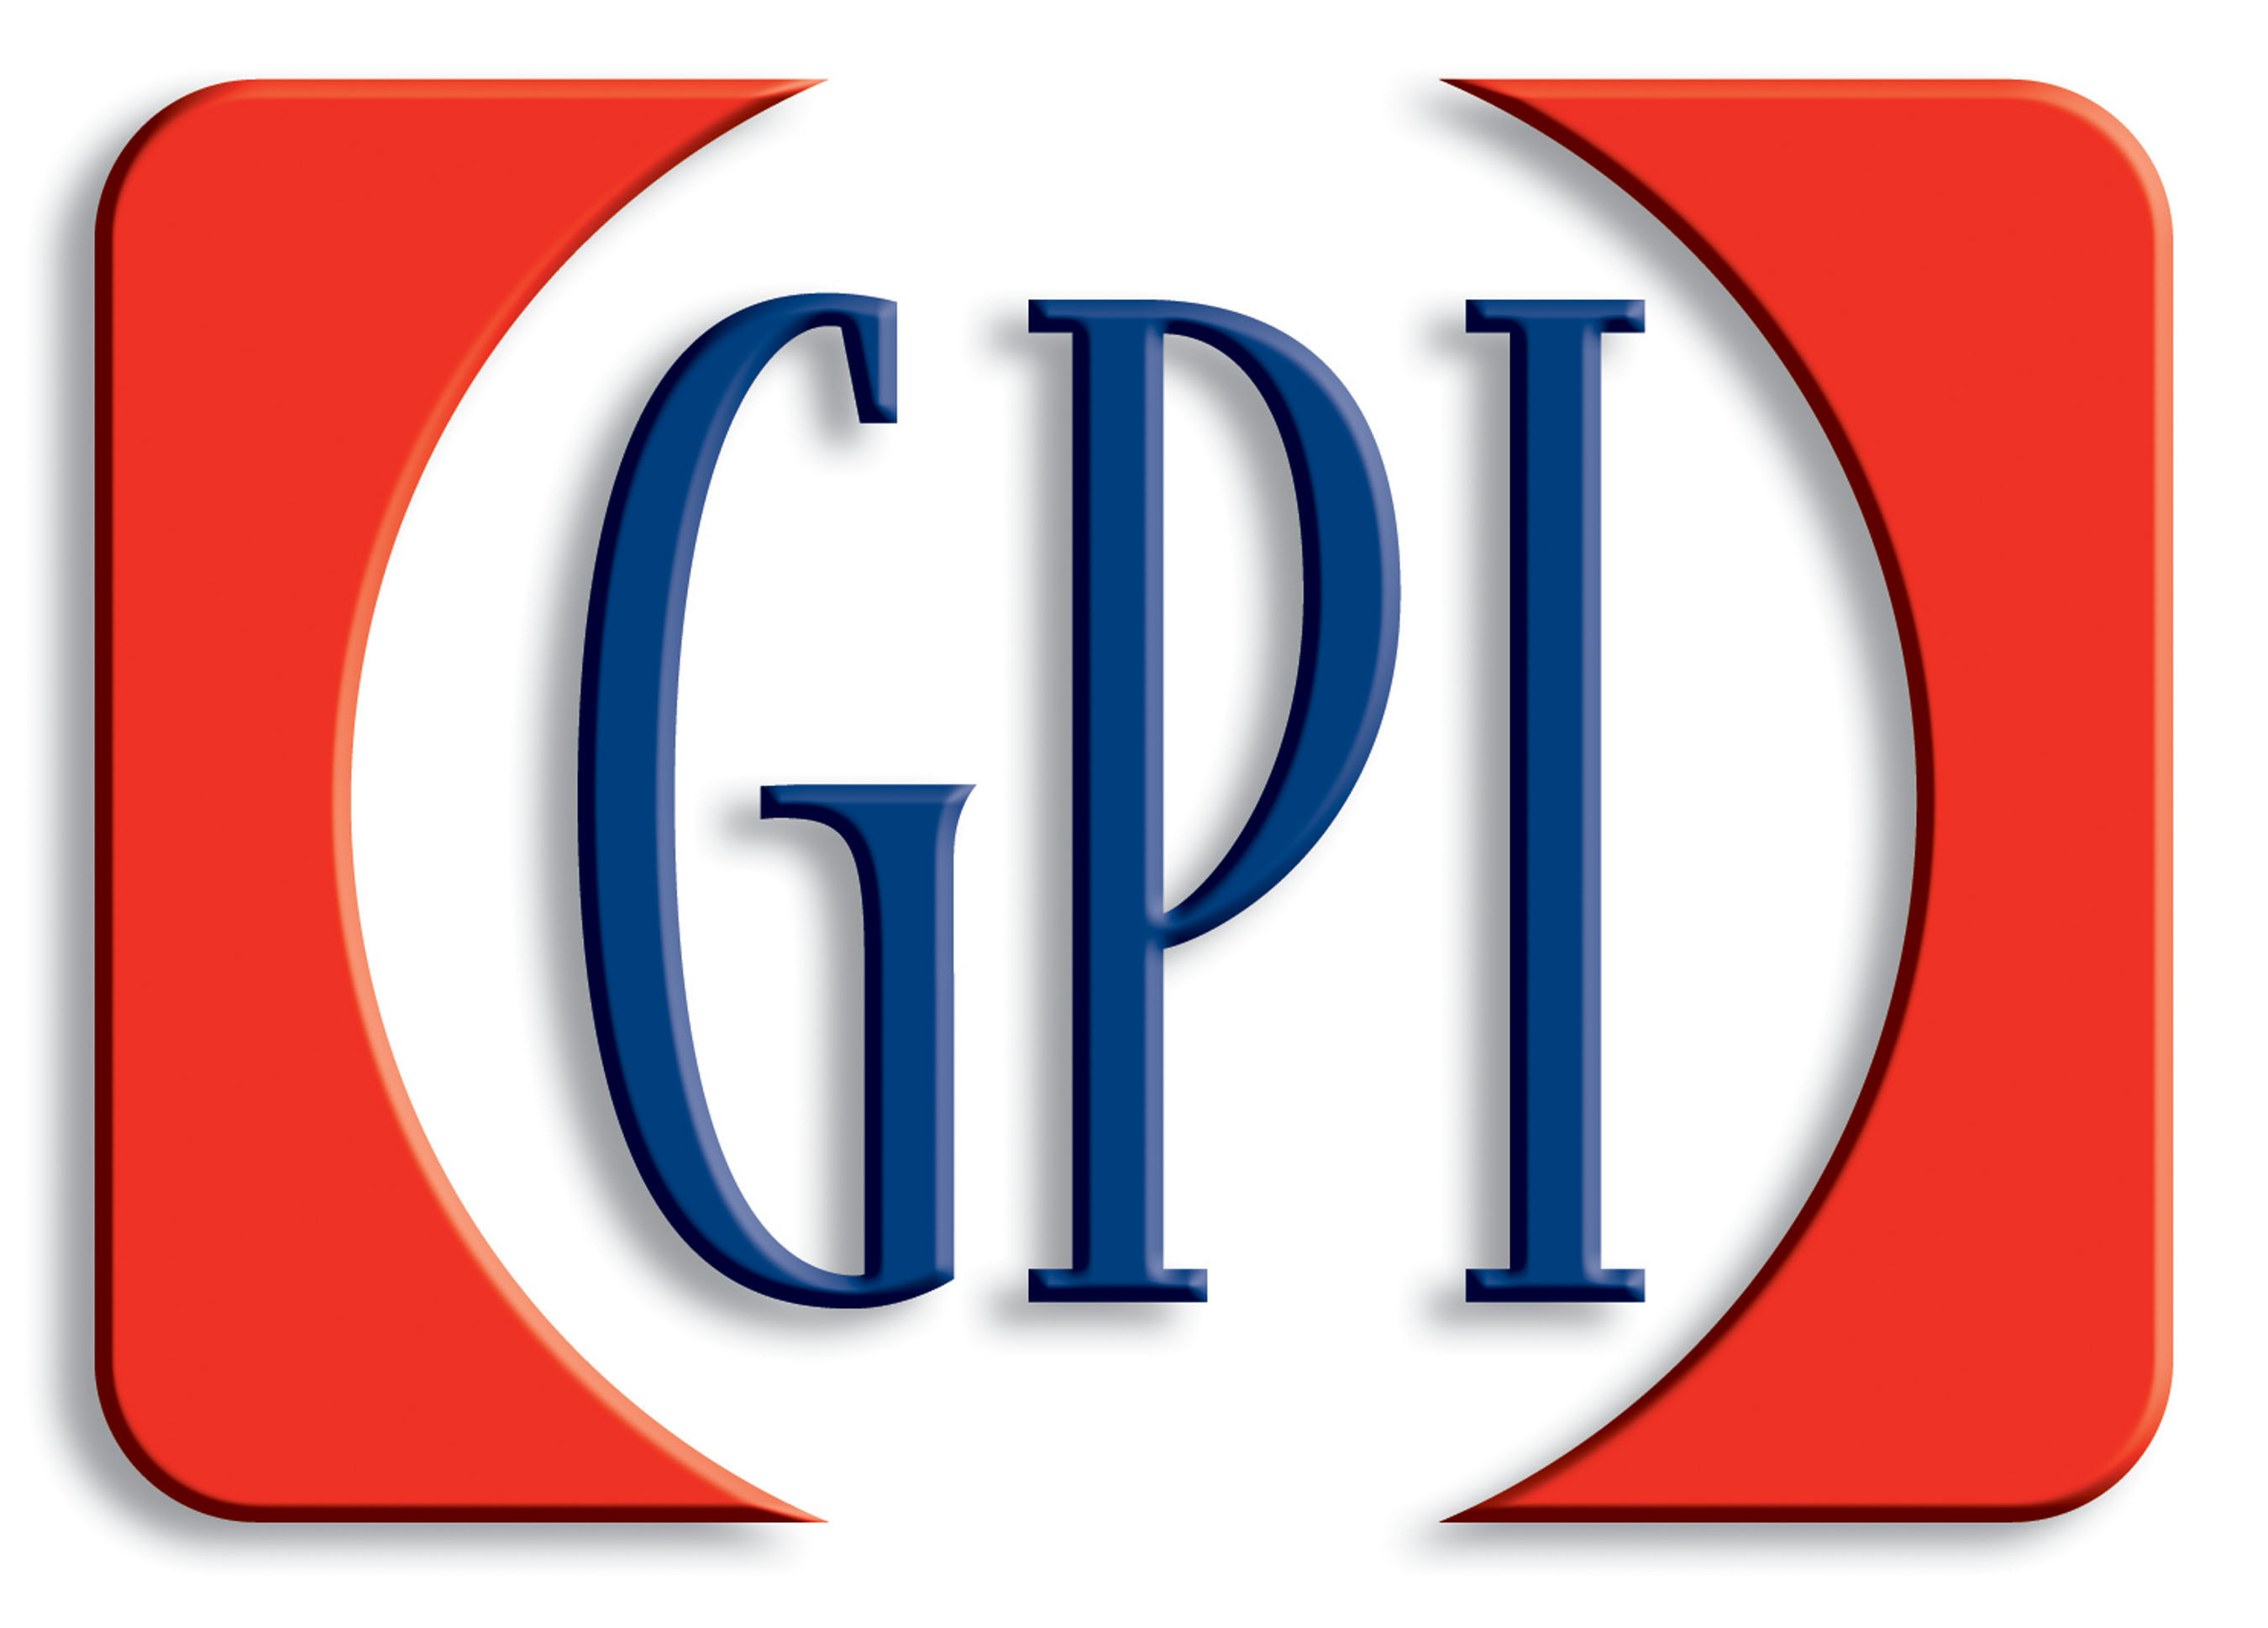 GPIC Announces Anticipated Closing Date For Acquisition By Angel